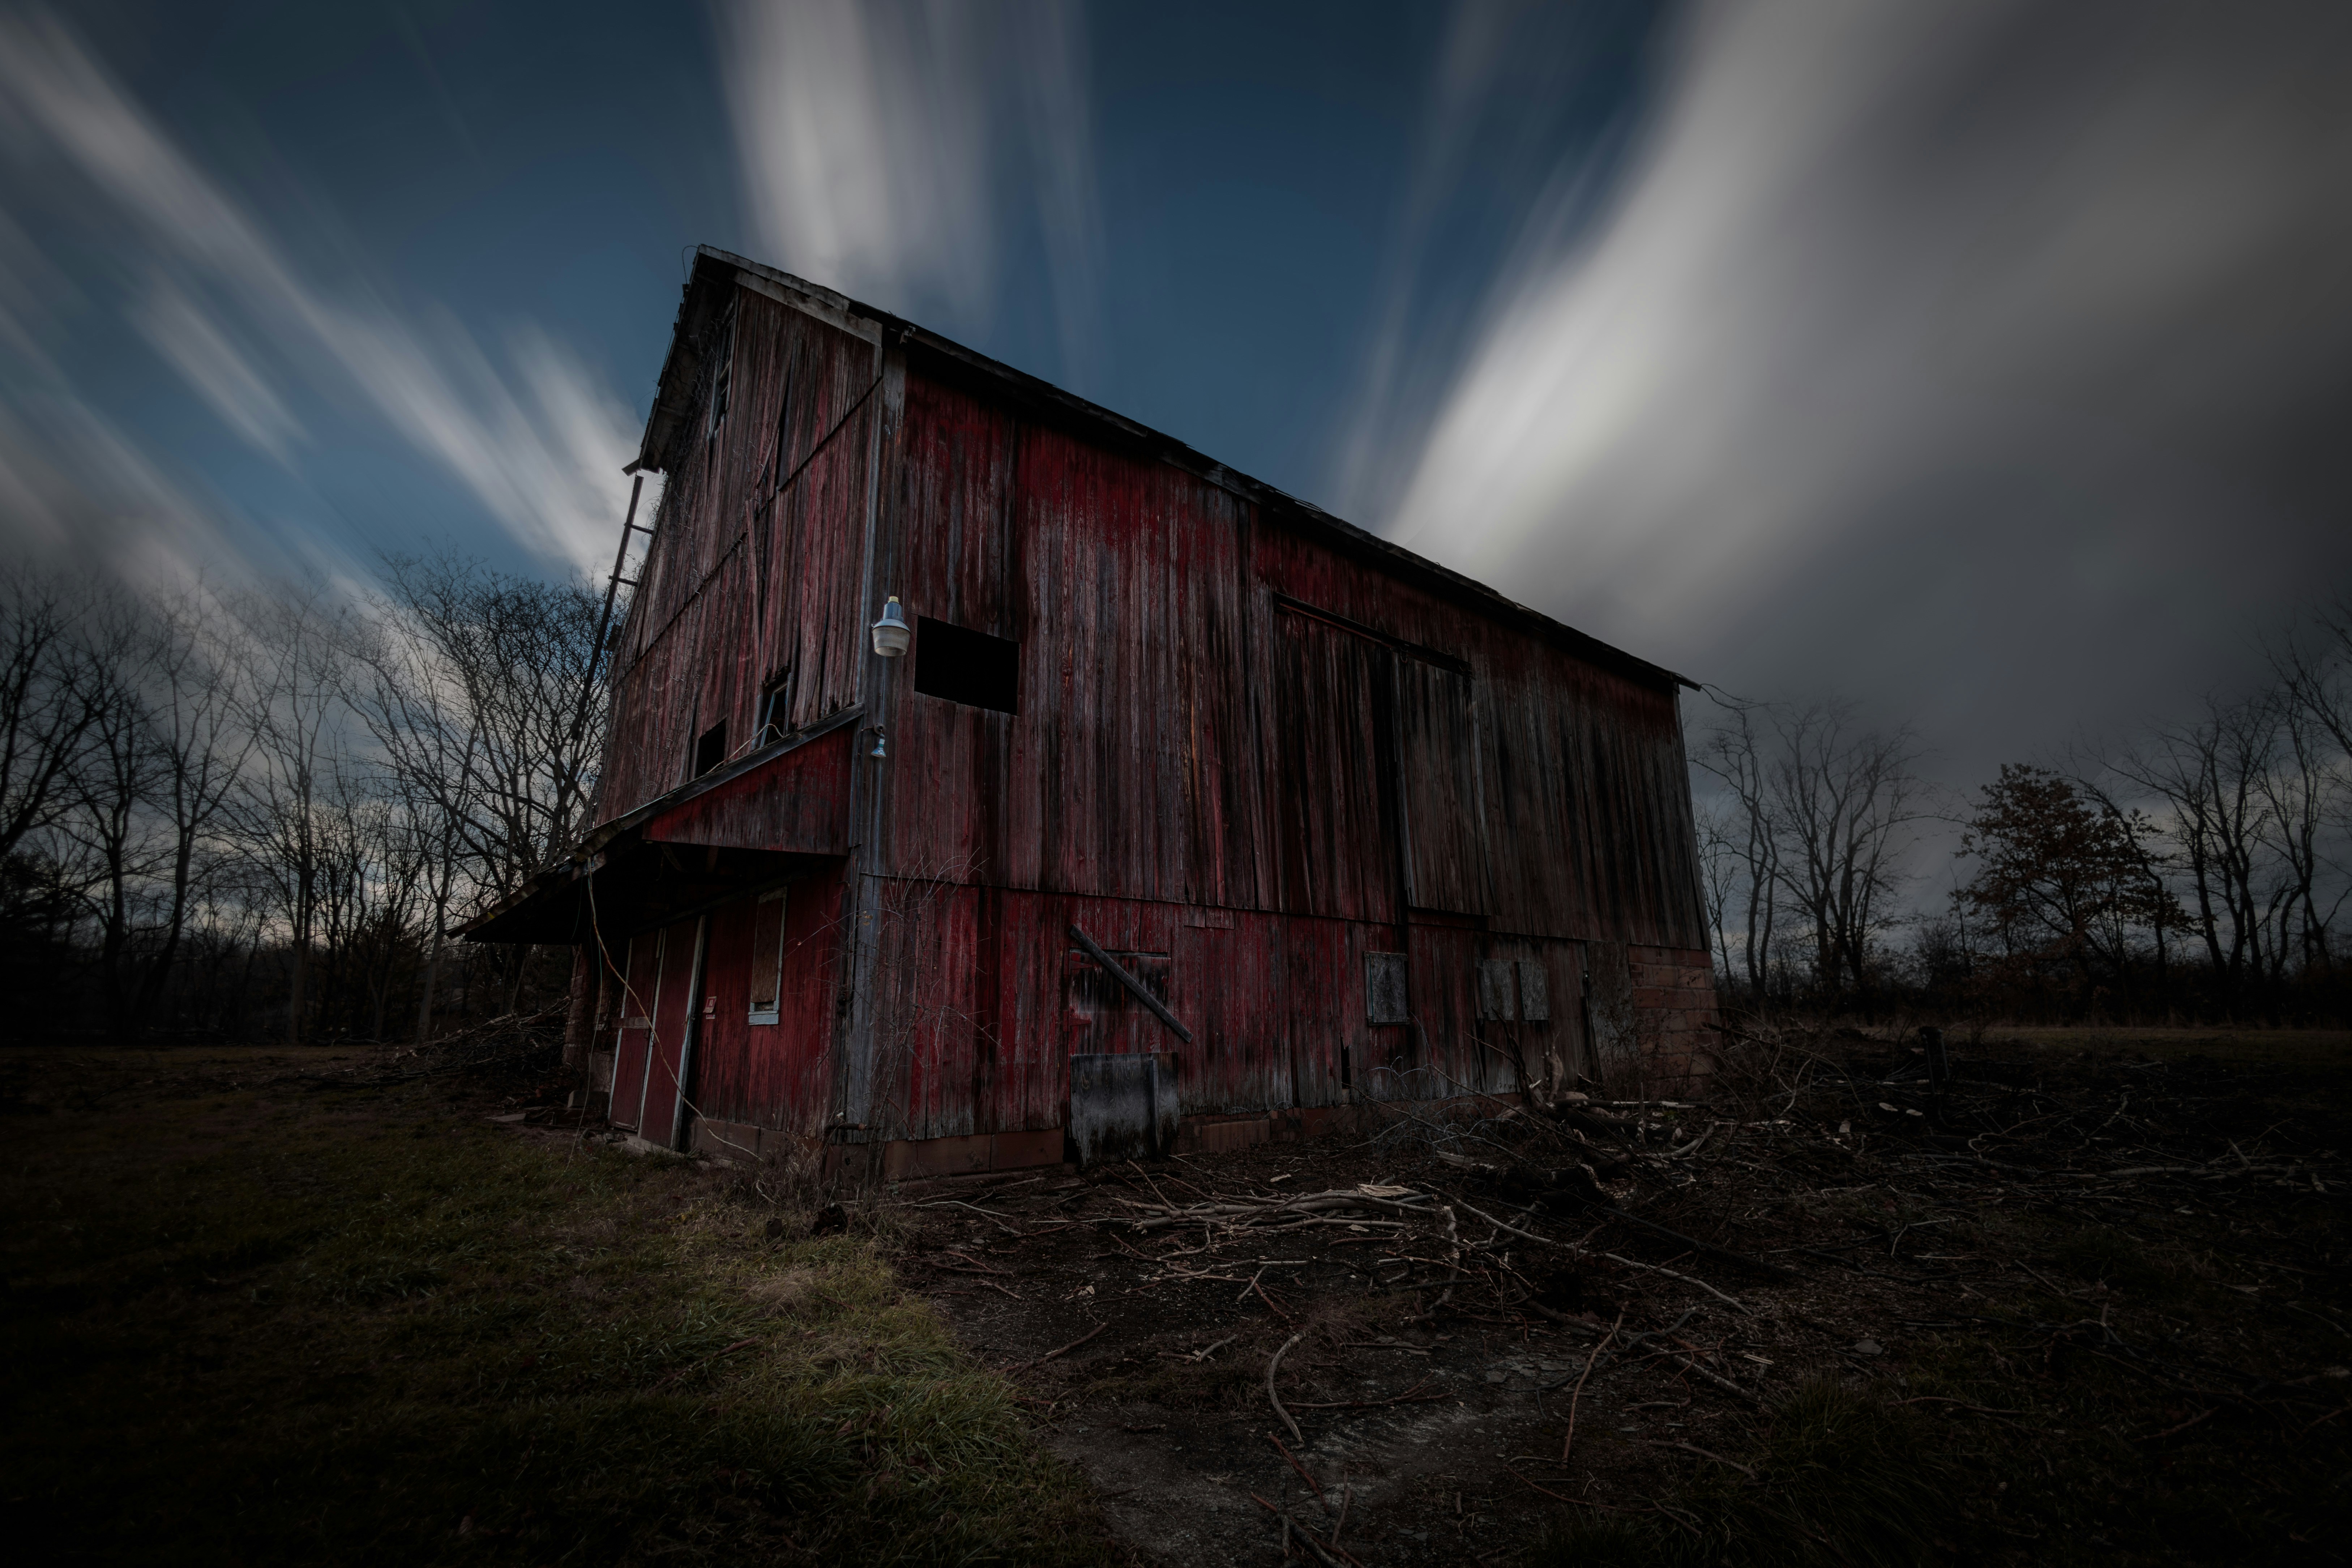 The clouds whip by an old abandoned barn.